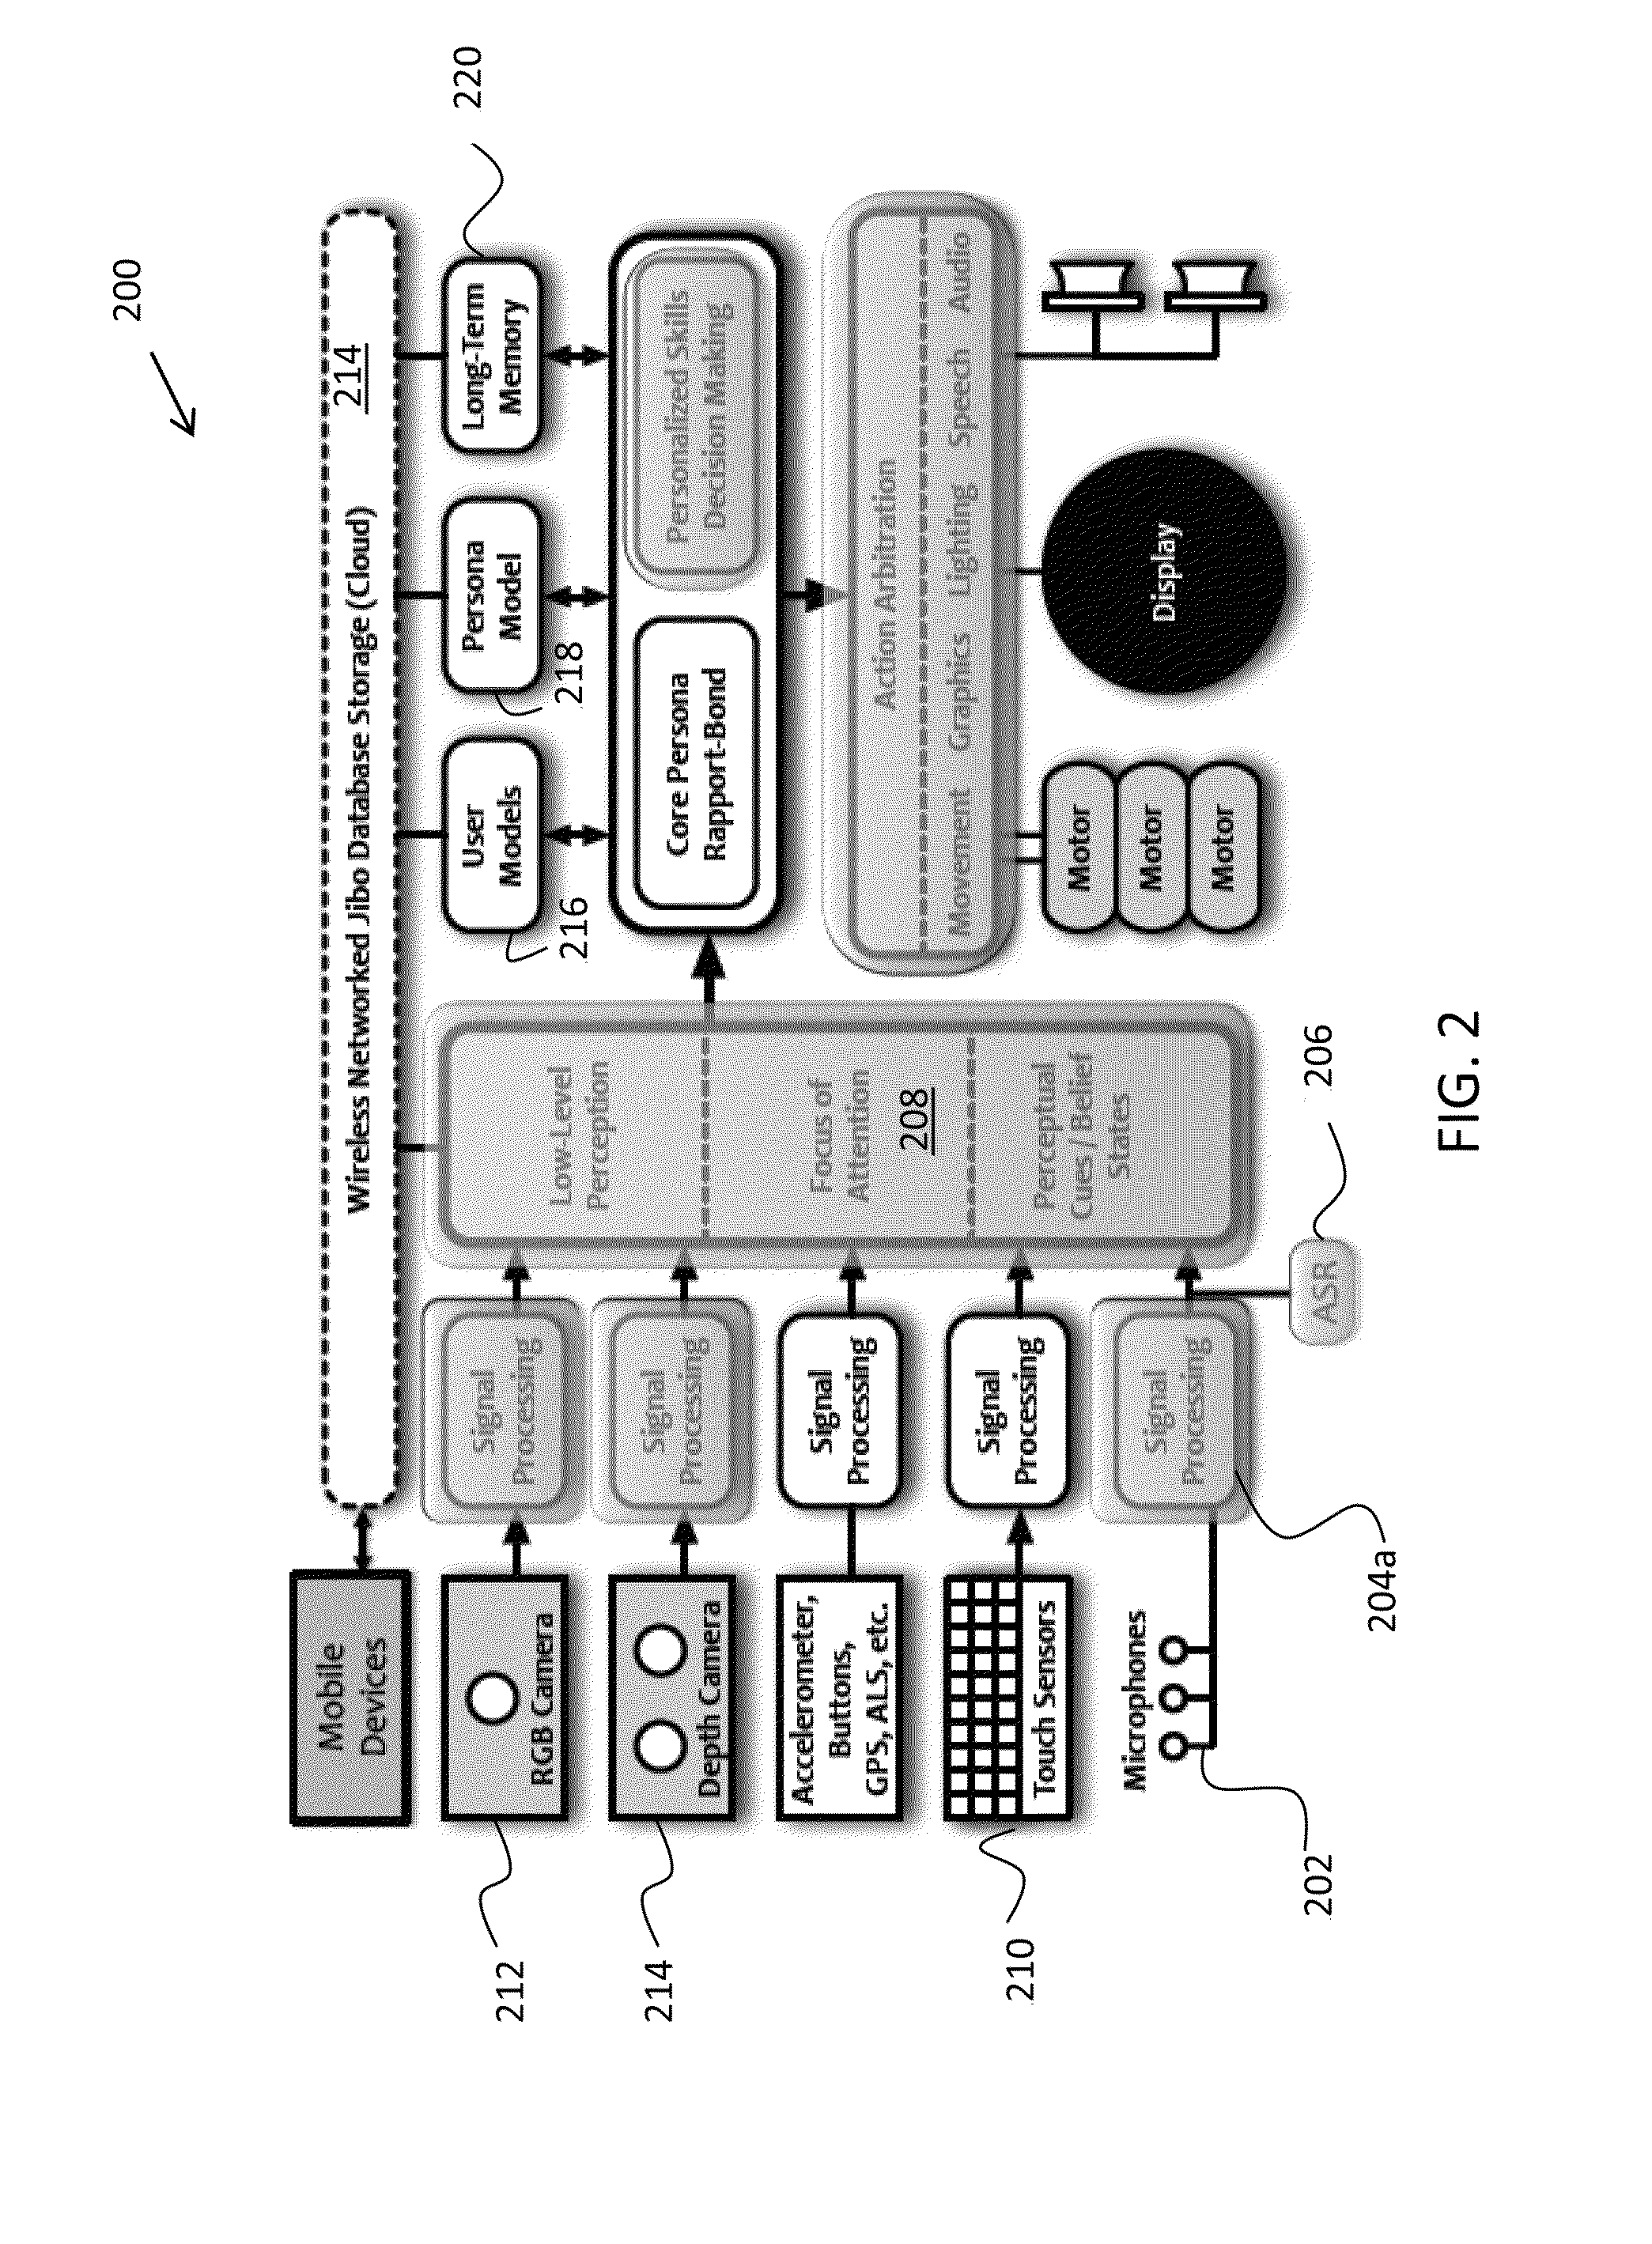 Apparatus and methods for providing a persistent companion device